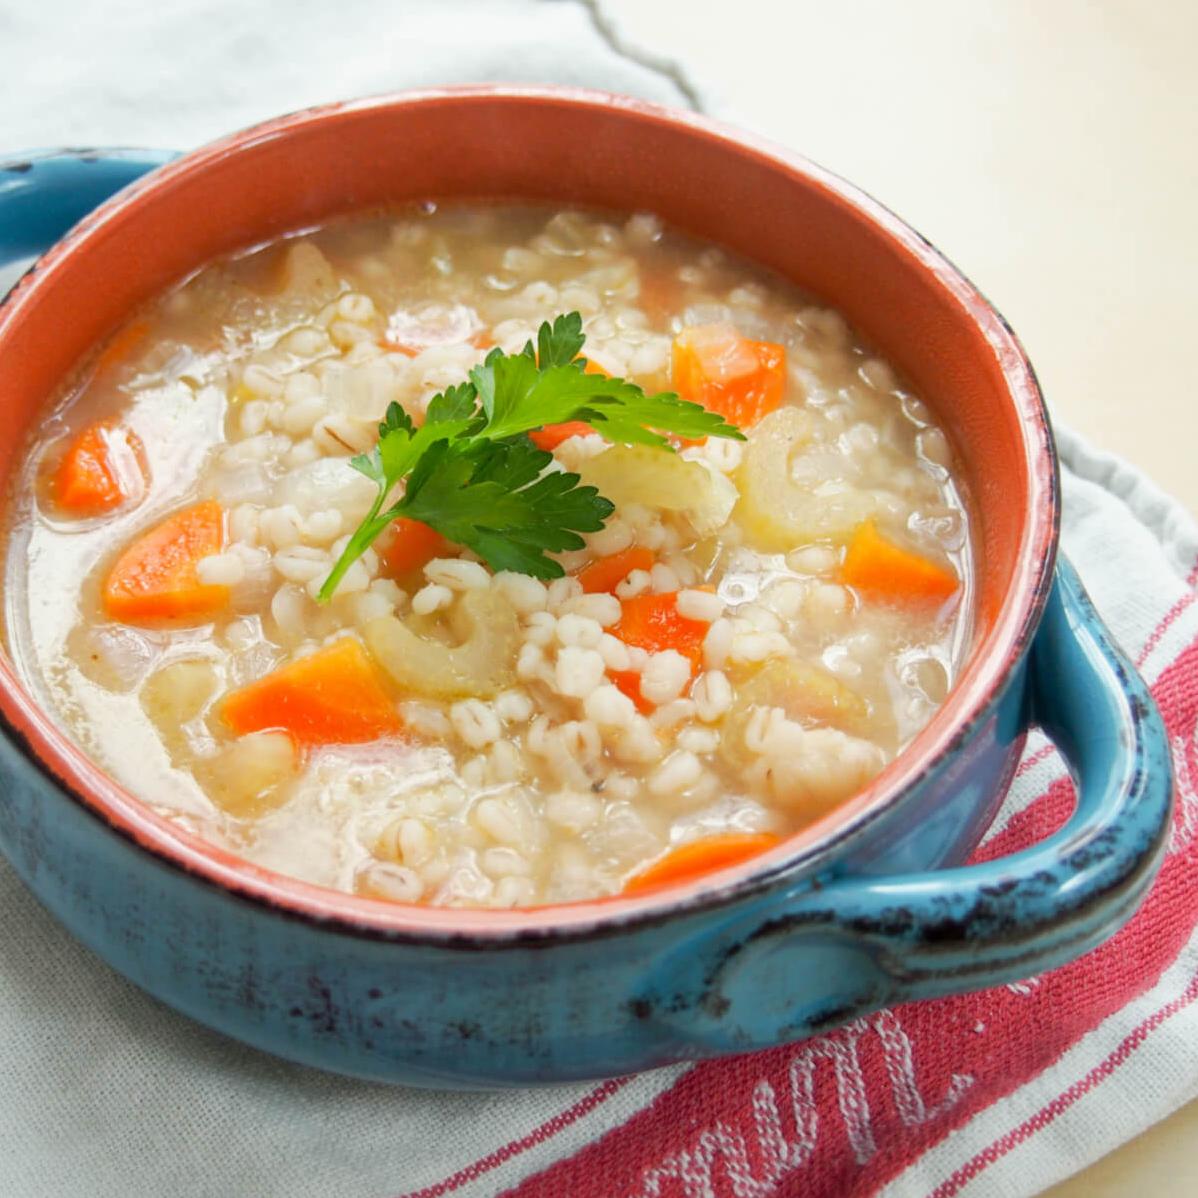  A hearty and flavorful soup that celebrates Scottish cuisine.